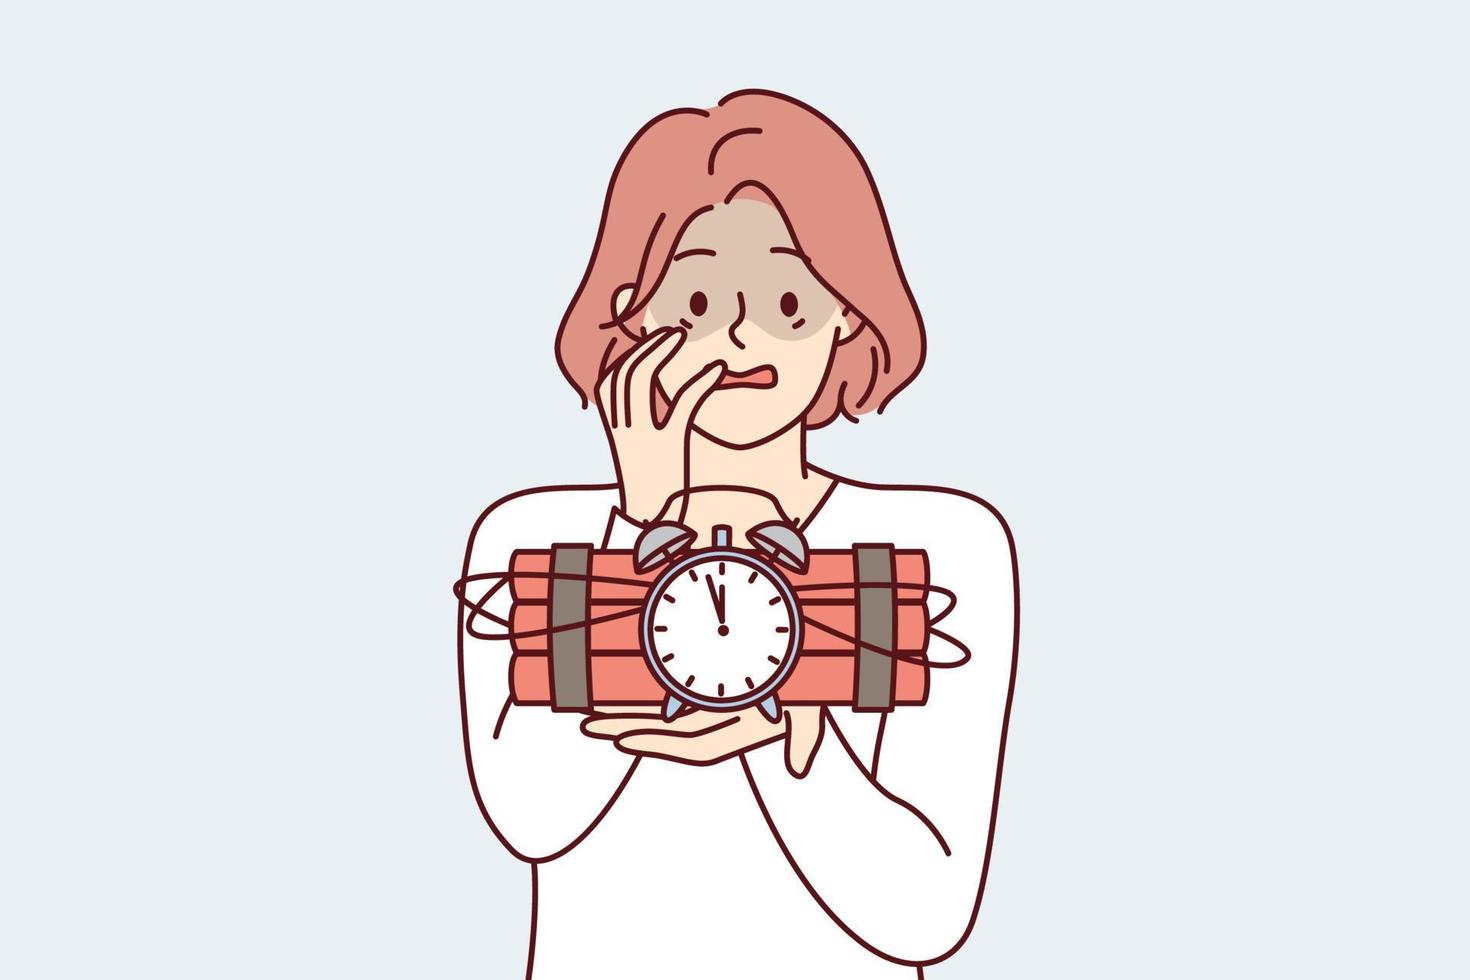 Frightened woman holds bomb and dynamite with clockwork in hand and does not know how to stop explosion. Concept approaching troubles that cannot be avoided. Flat vector illustration